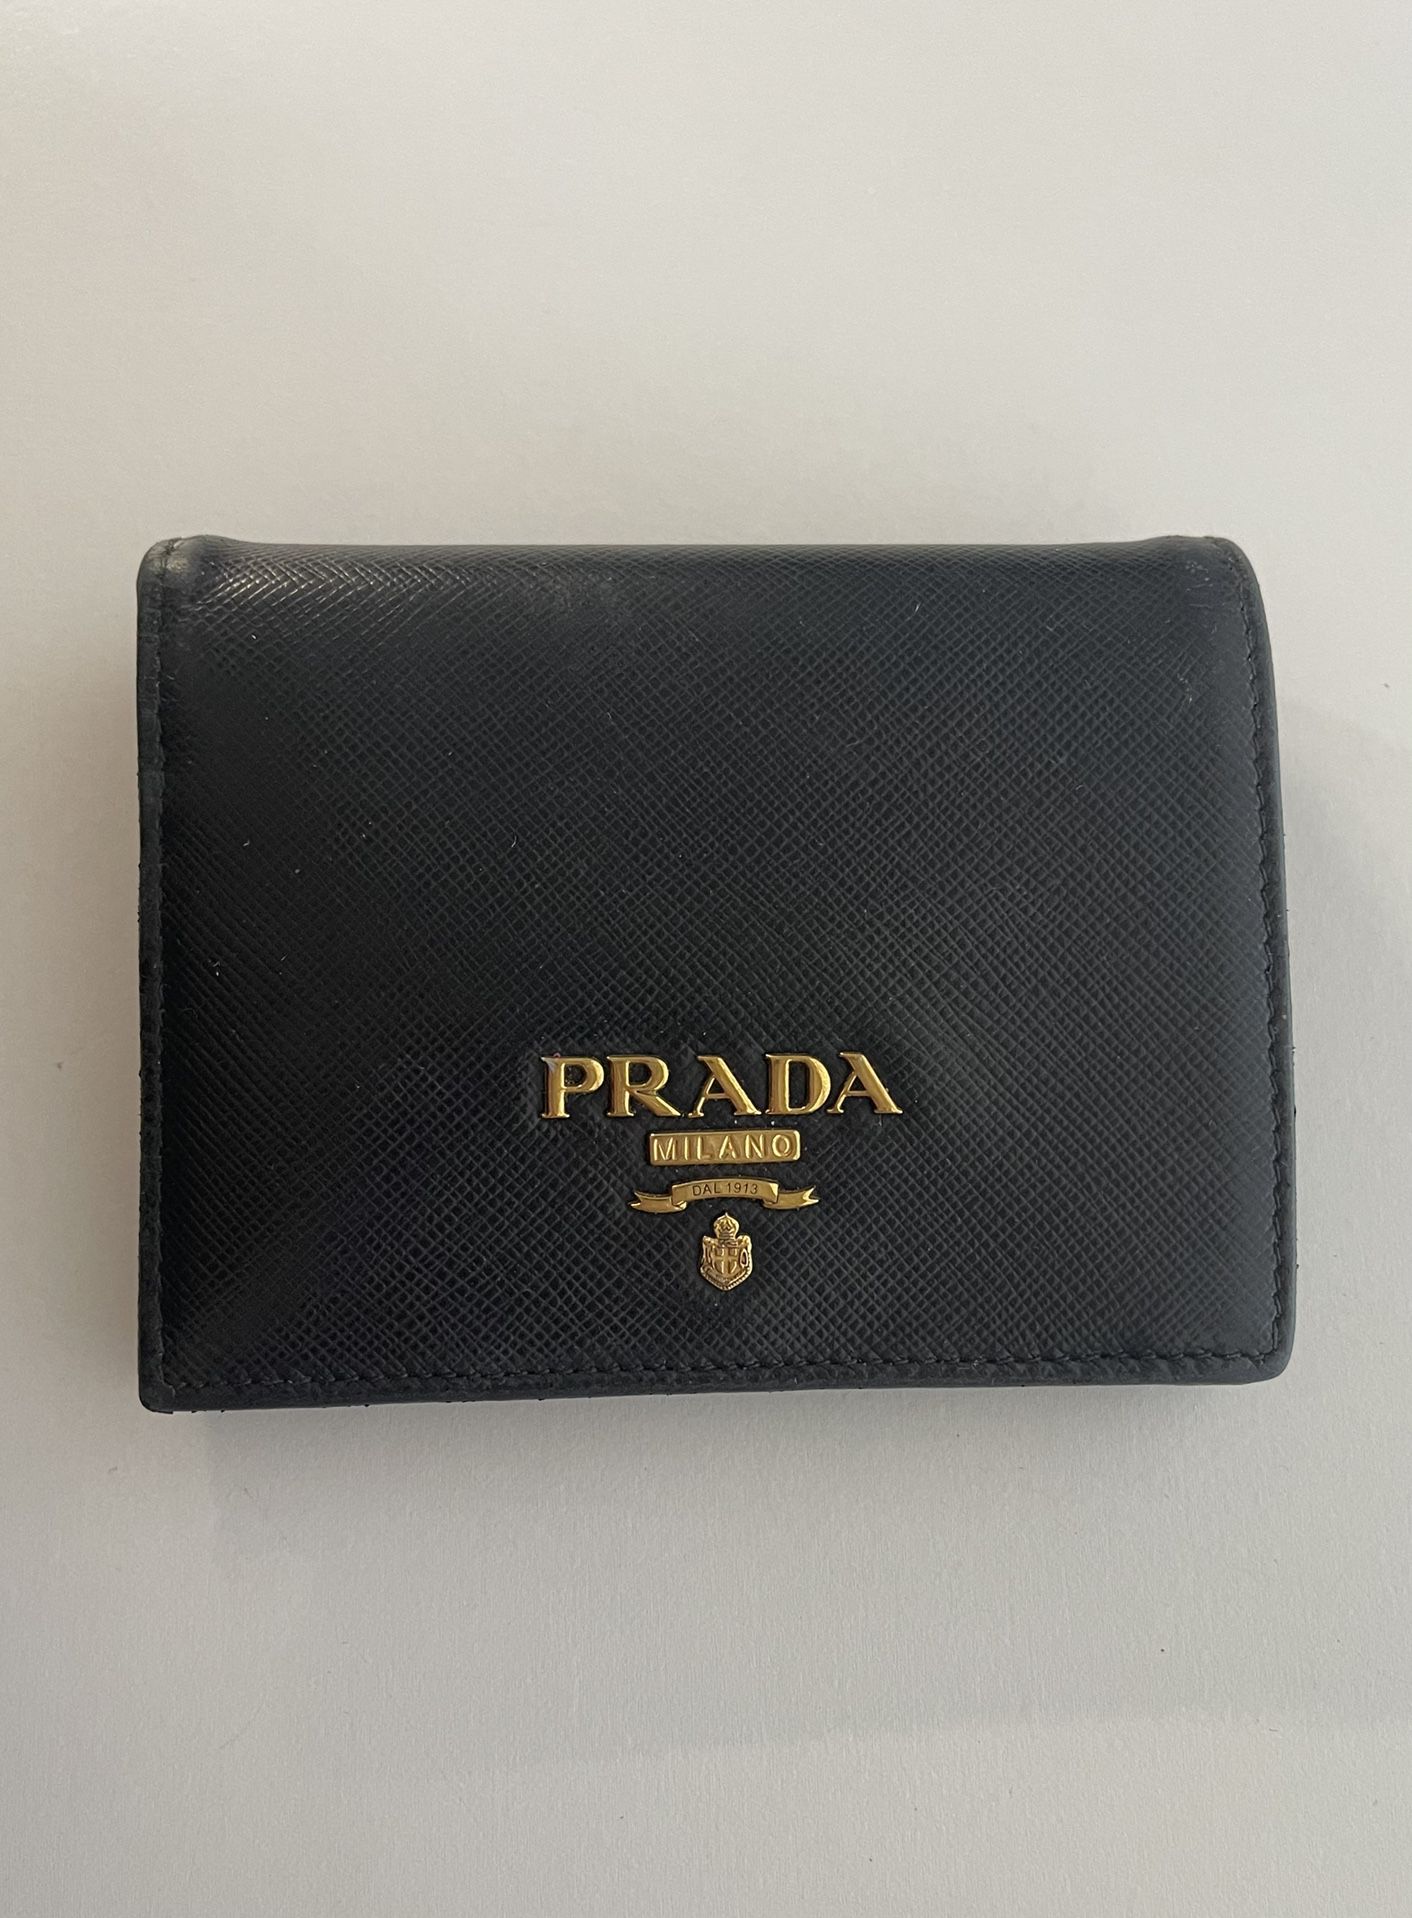 Authentic PRADA wallet - Small Saffiano Leather Wallet